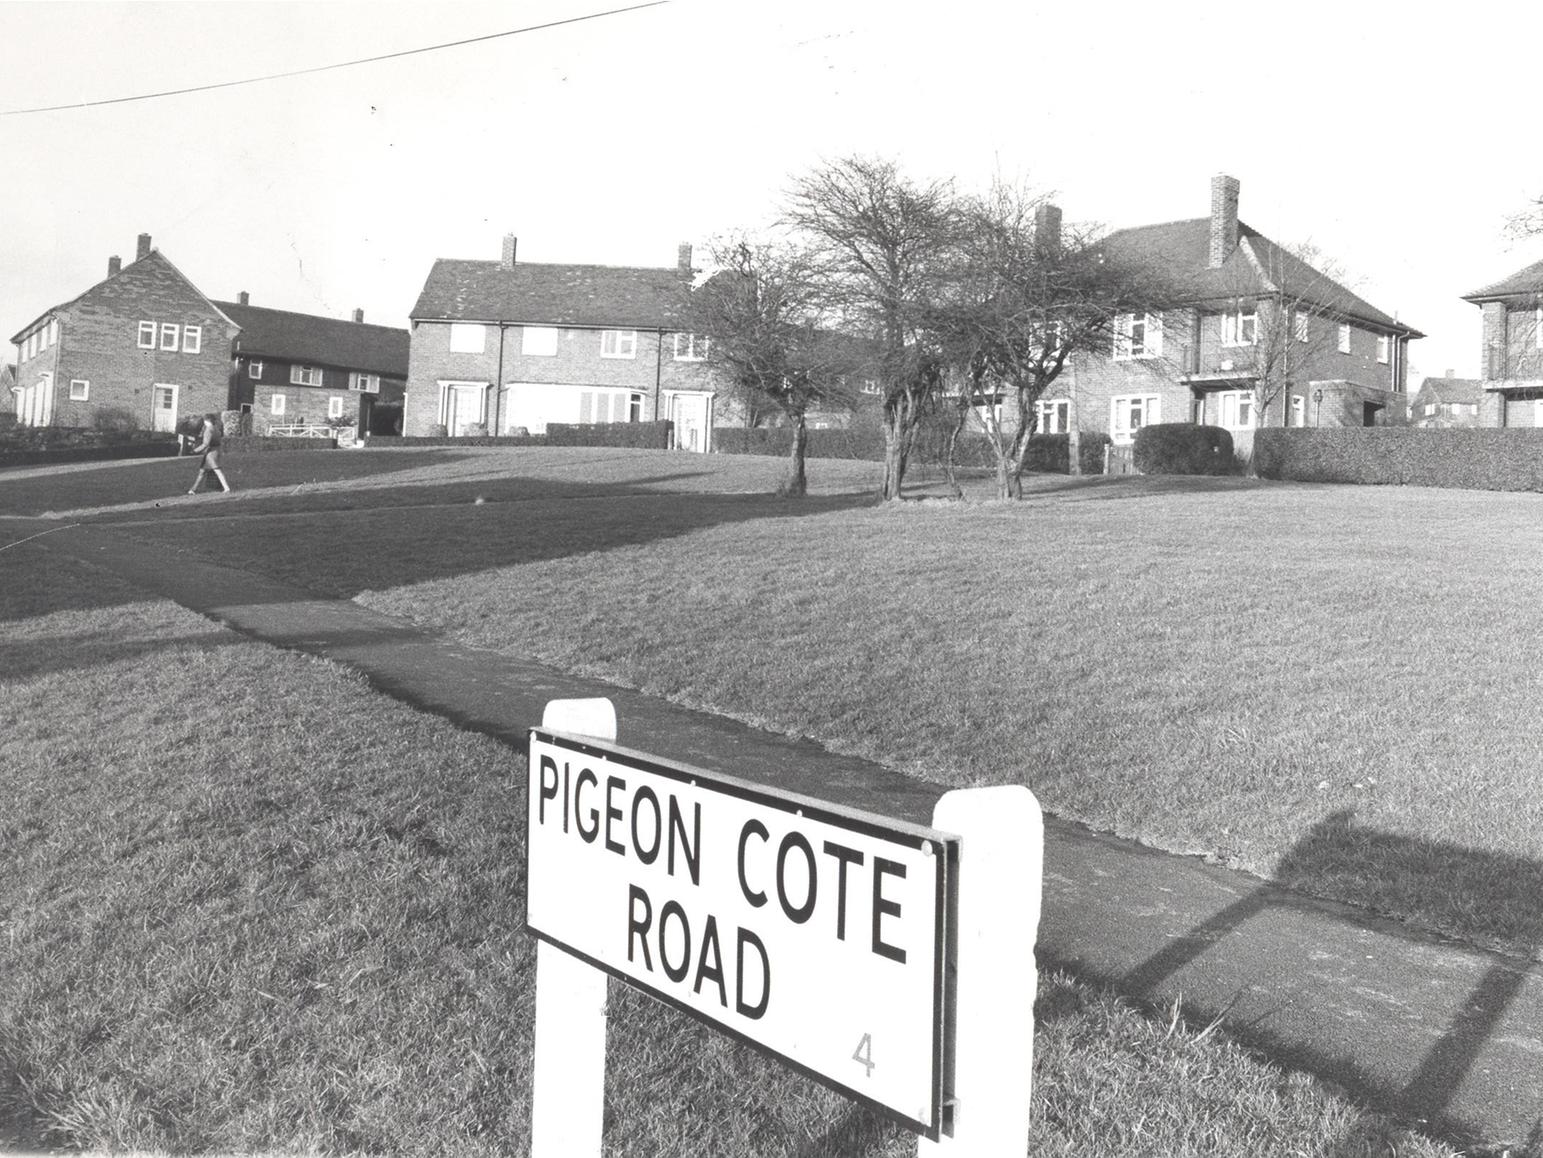 Did live near or on Pigeon Cote Road in LS14 back in the day?